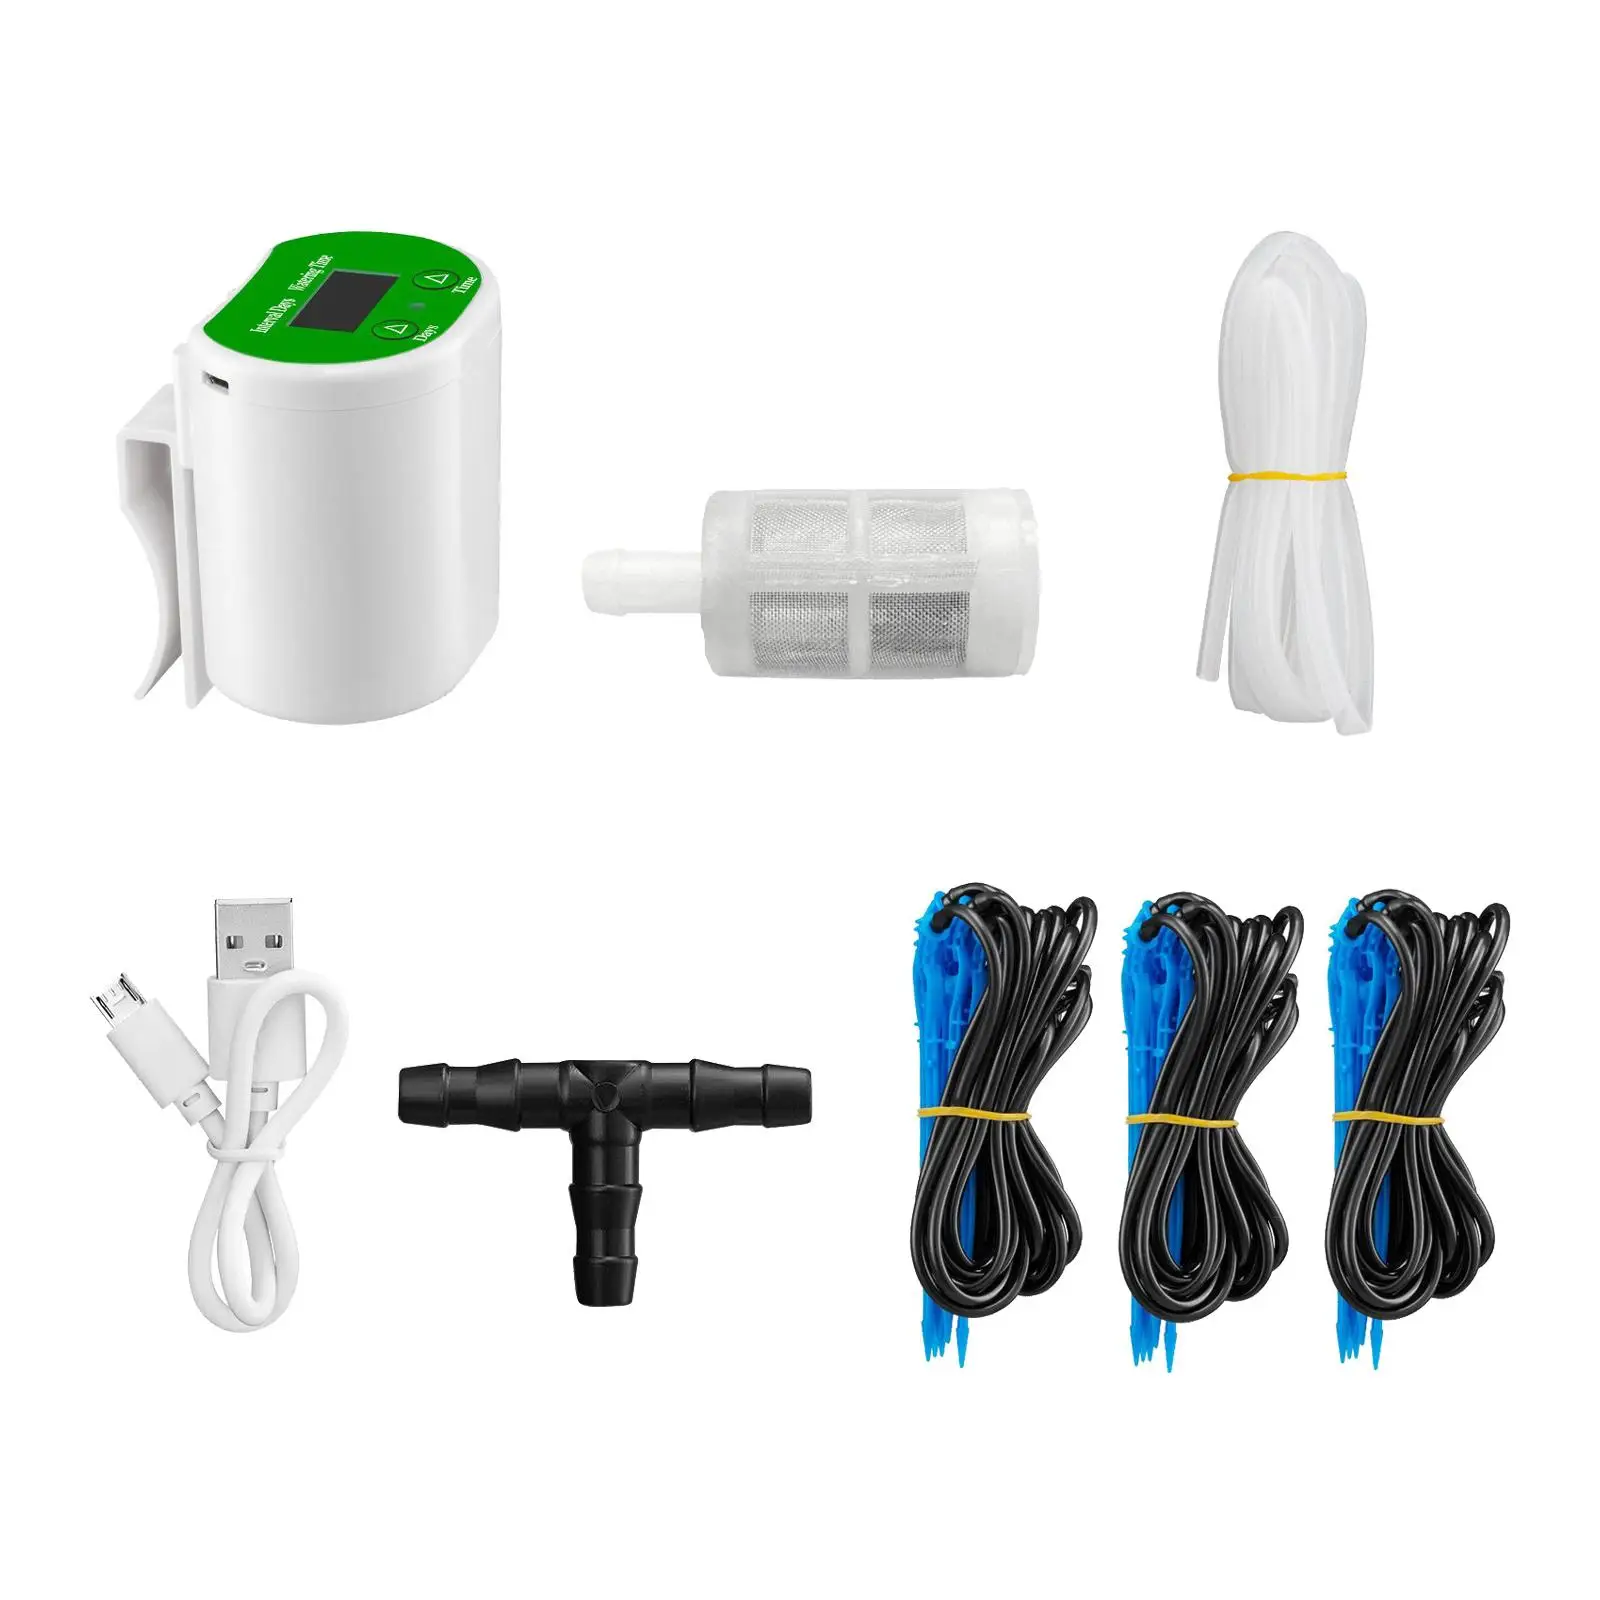 Gardening Irrigation System Automatic Self Watering System for Garden Yard